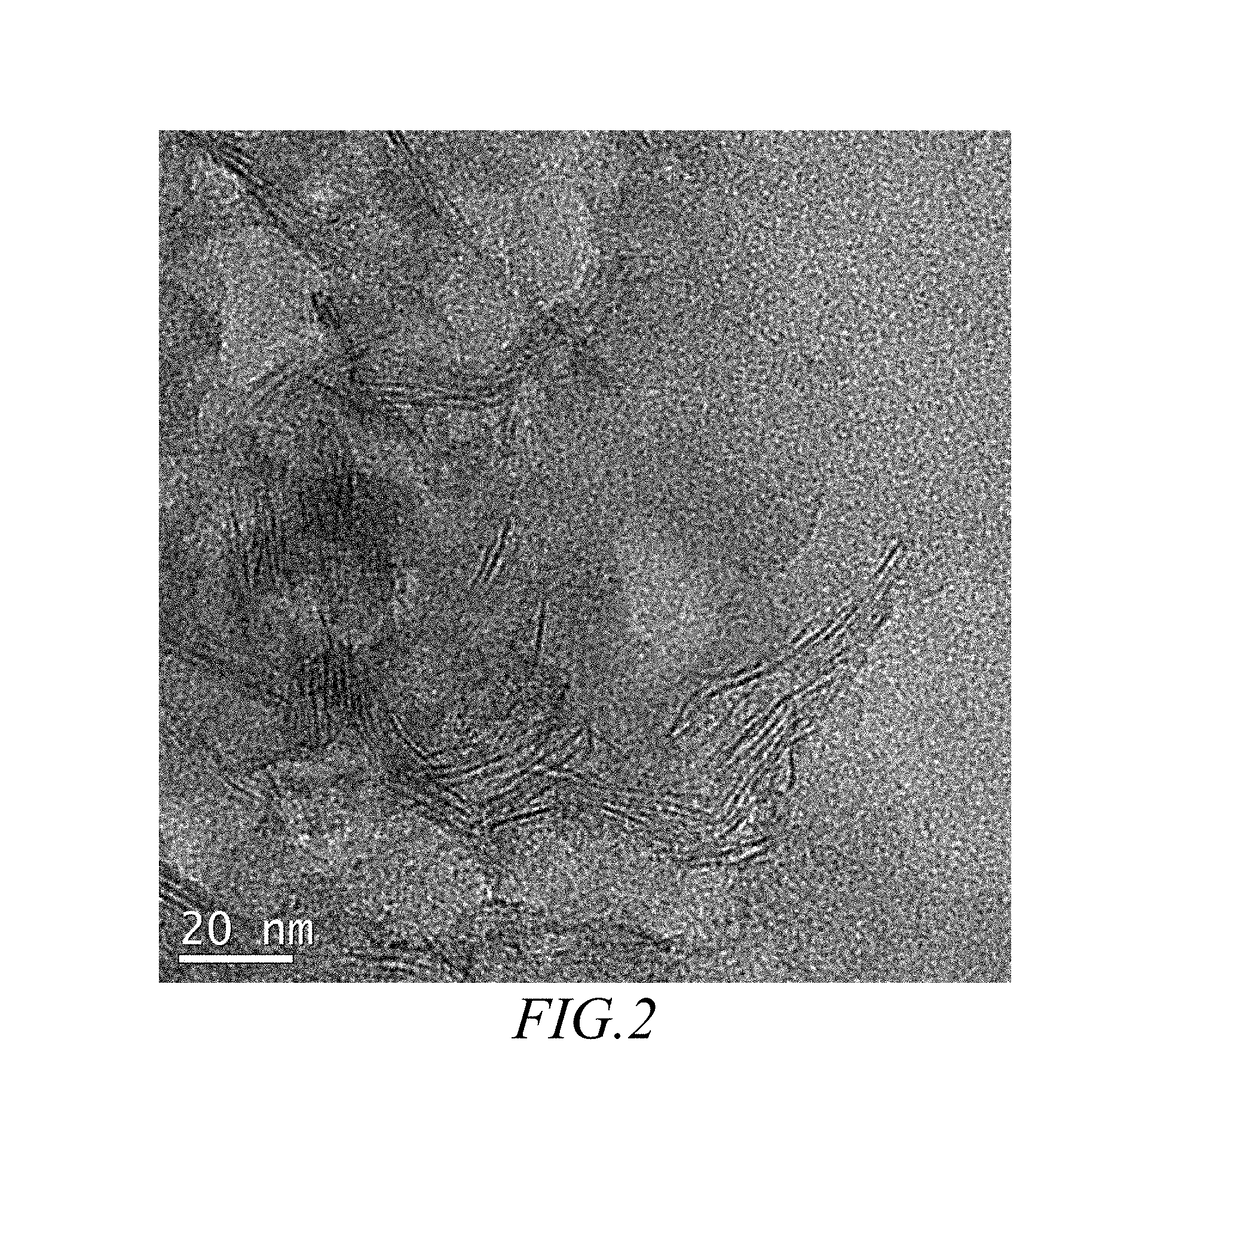 Conductive polymer-matrix compositions and uses thereof